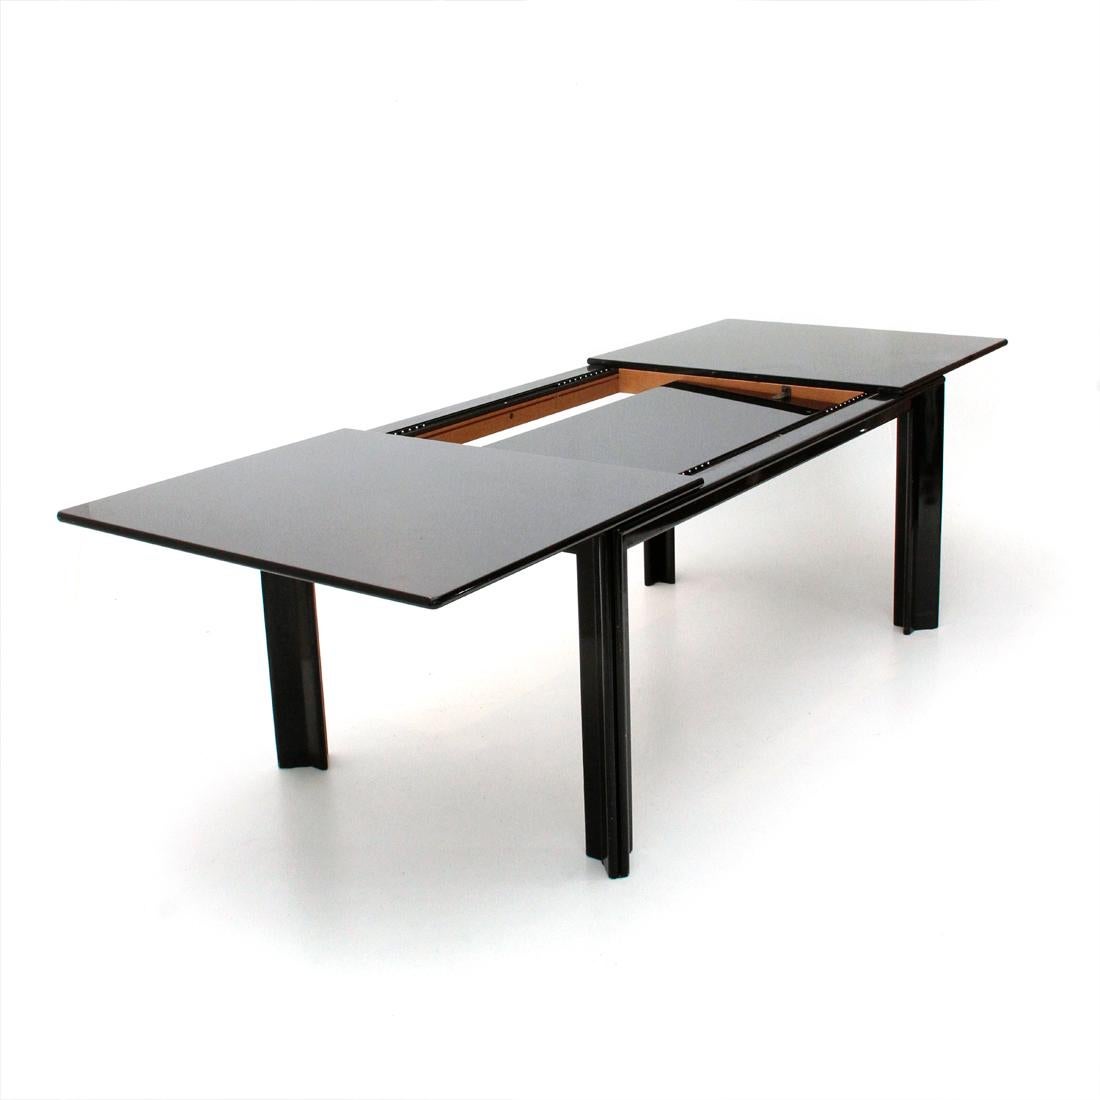 Black Mou lacquered table designed by Tobia Scarpa and produced by Molteni in the 1970s.
Top in black extendable lacquered wood with a rectangular shape and rounded corners.
Rectangular legs in lacquered wood.
Good general conditions, some signs